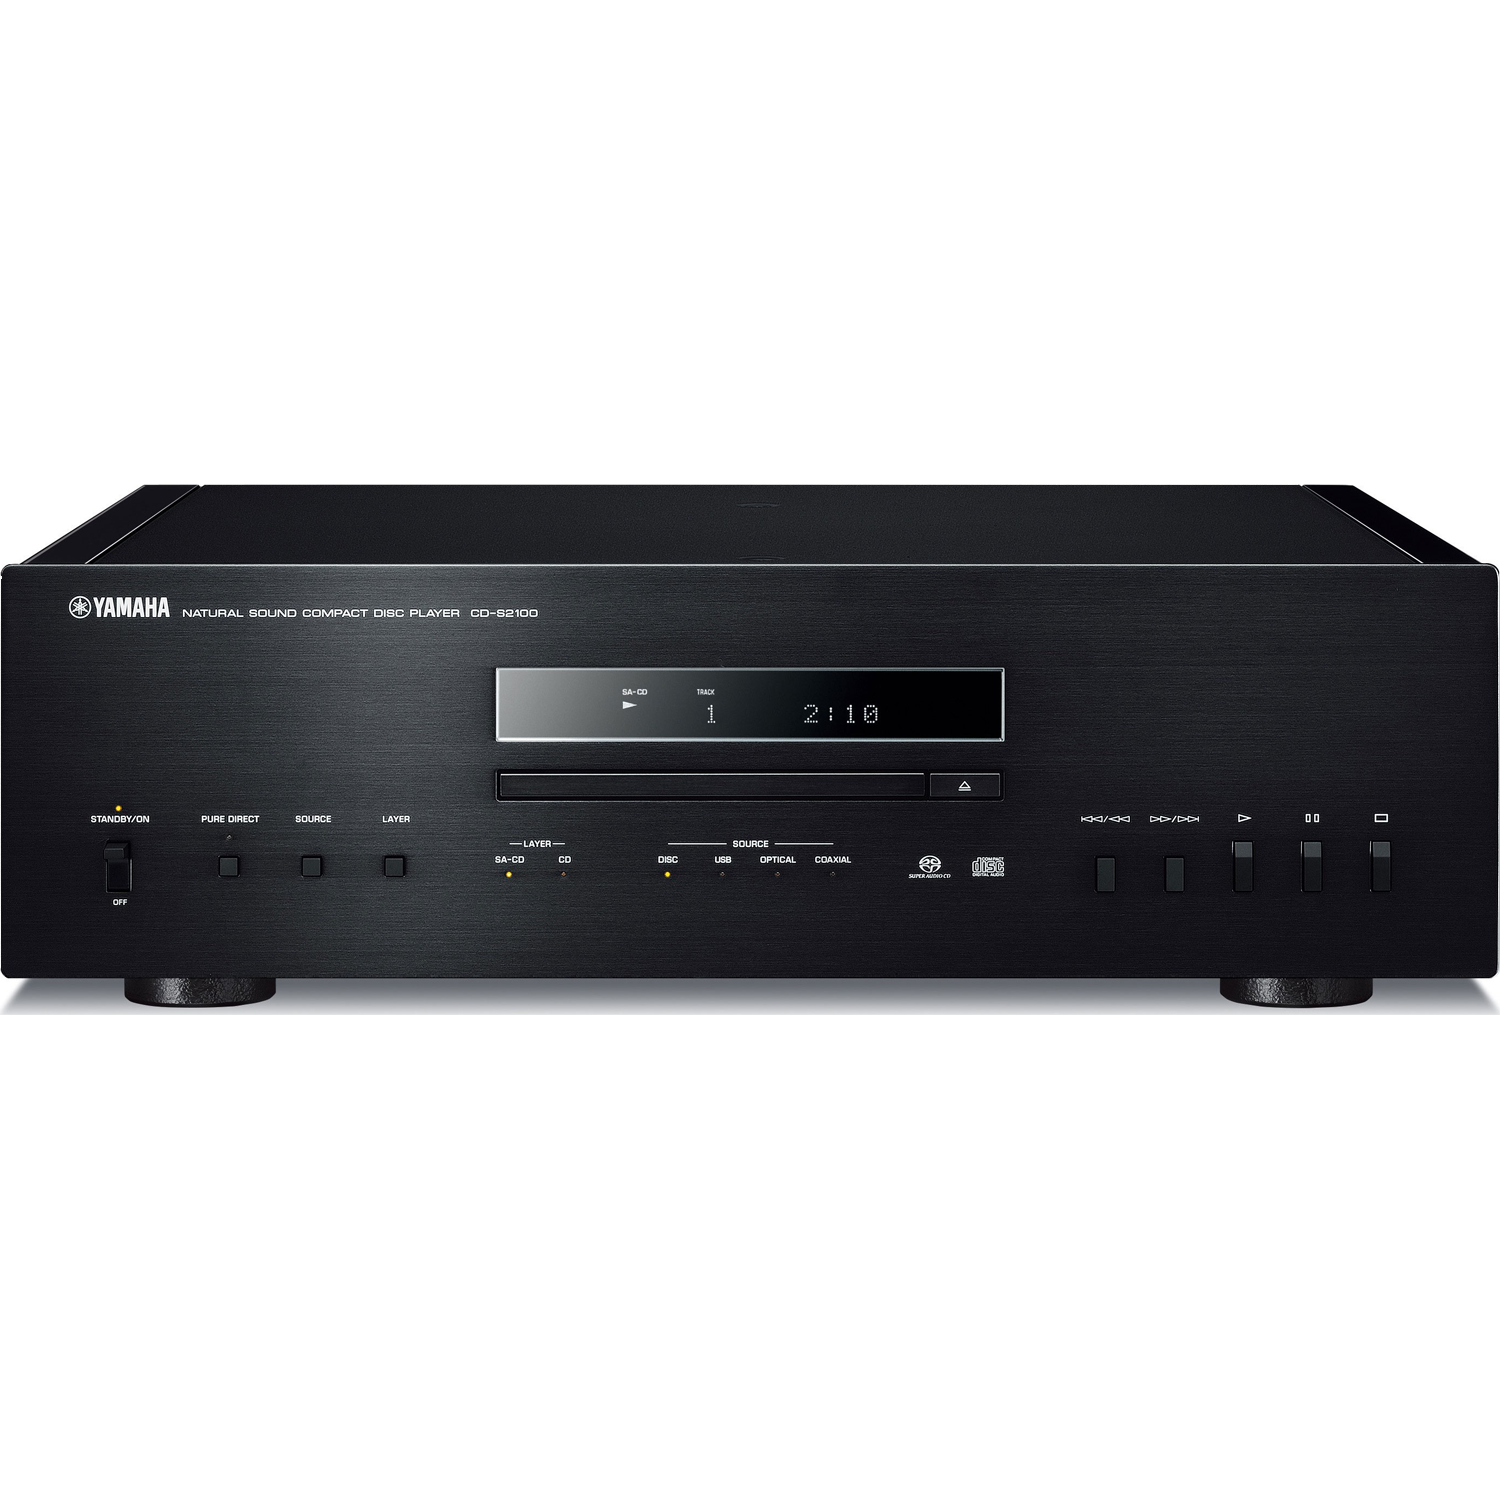 Them tofu Applied YAMAHA CD-S2100 Natural Sound Super Audio CD Player Black | Accessories4less